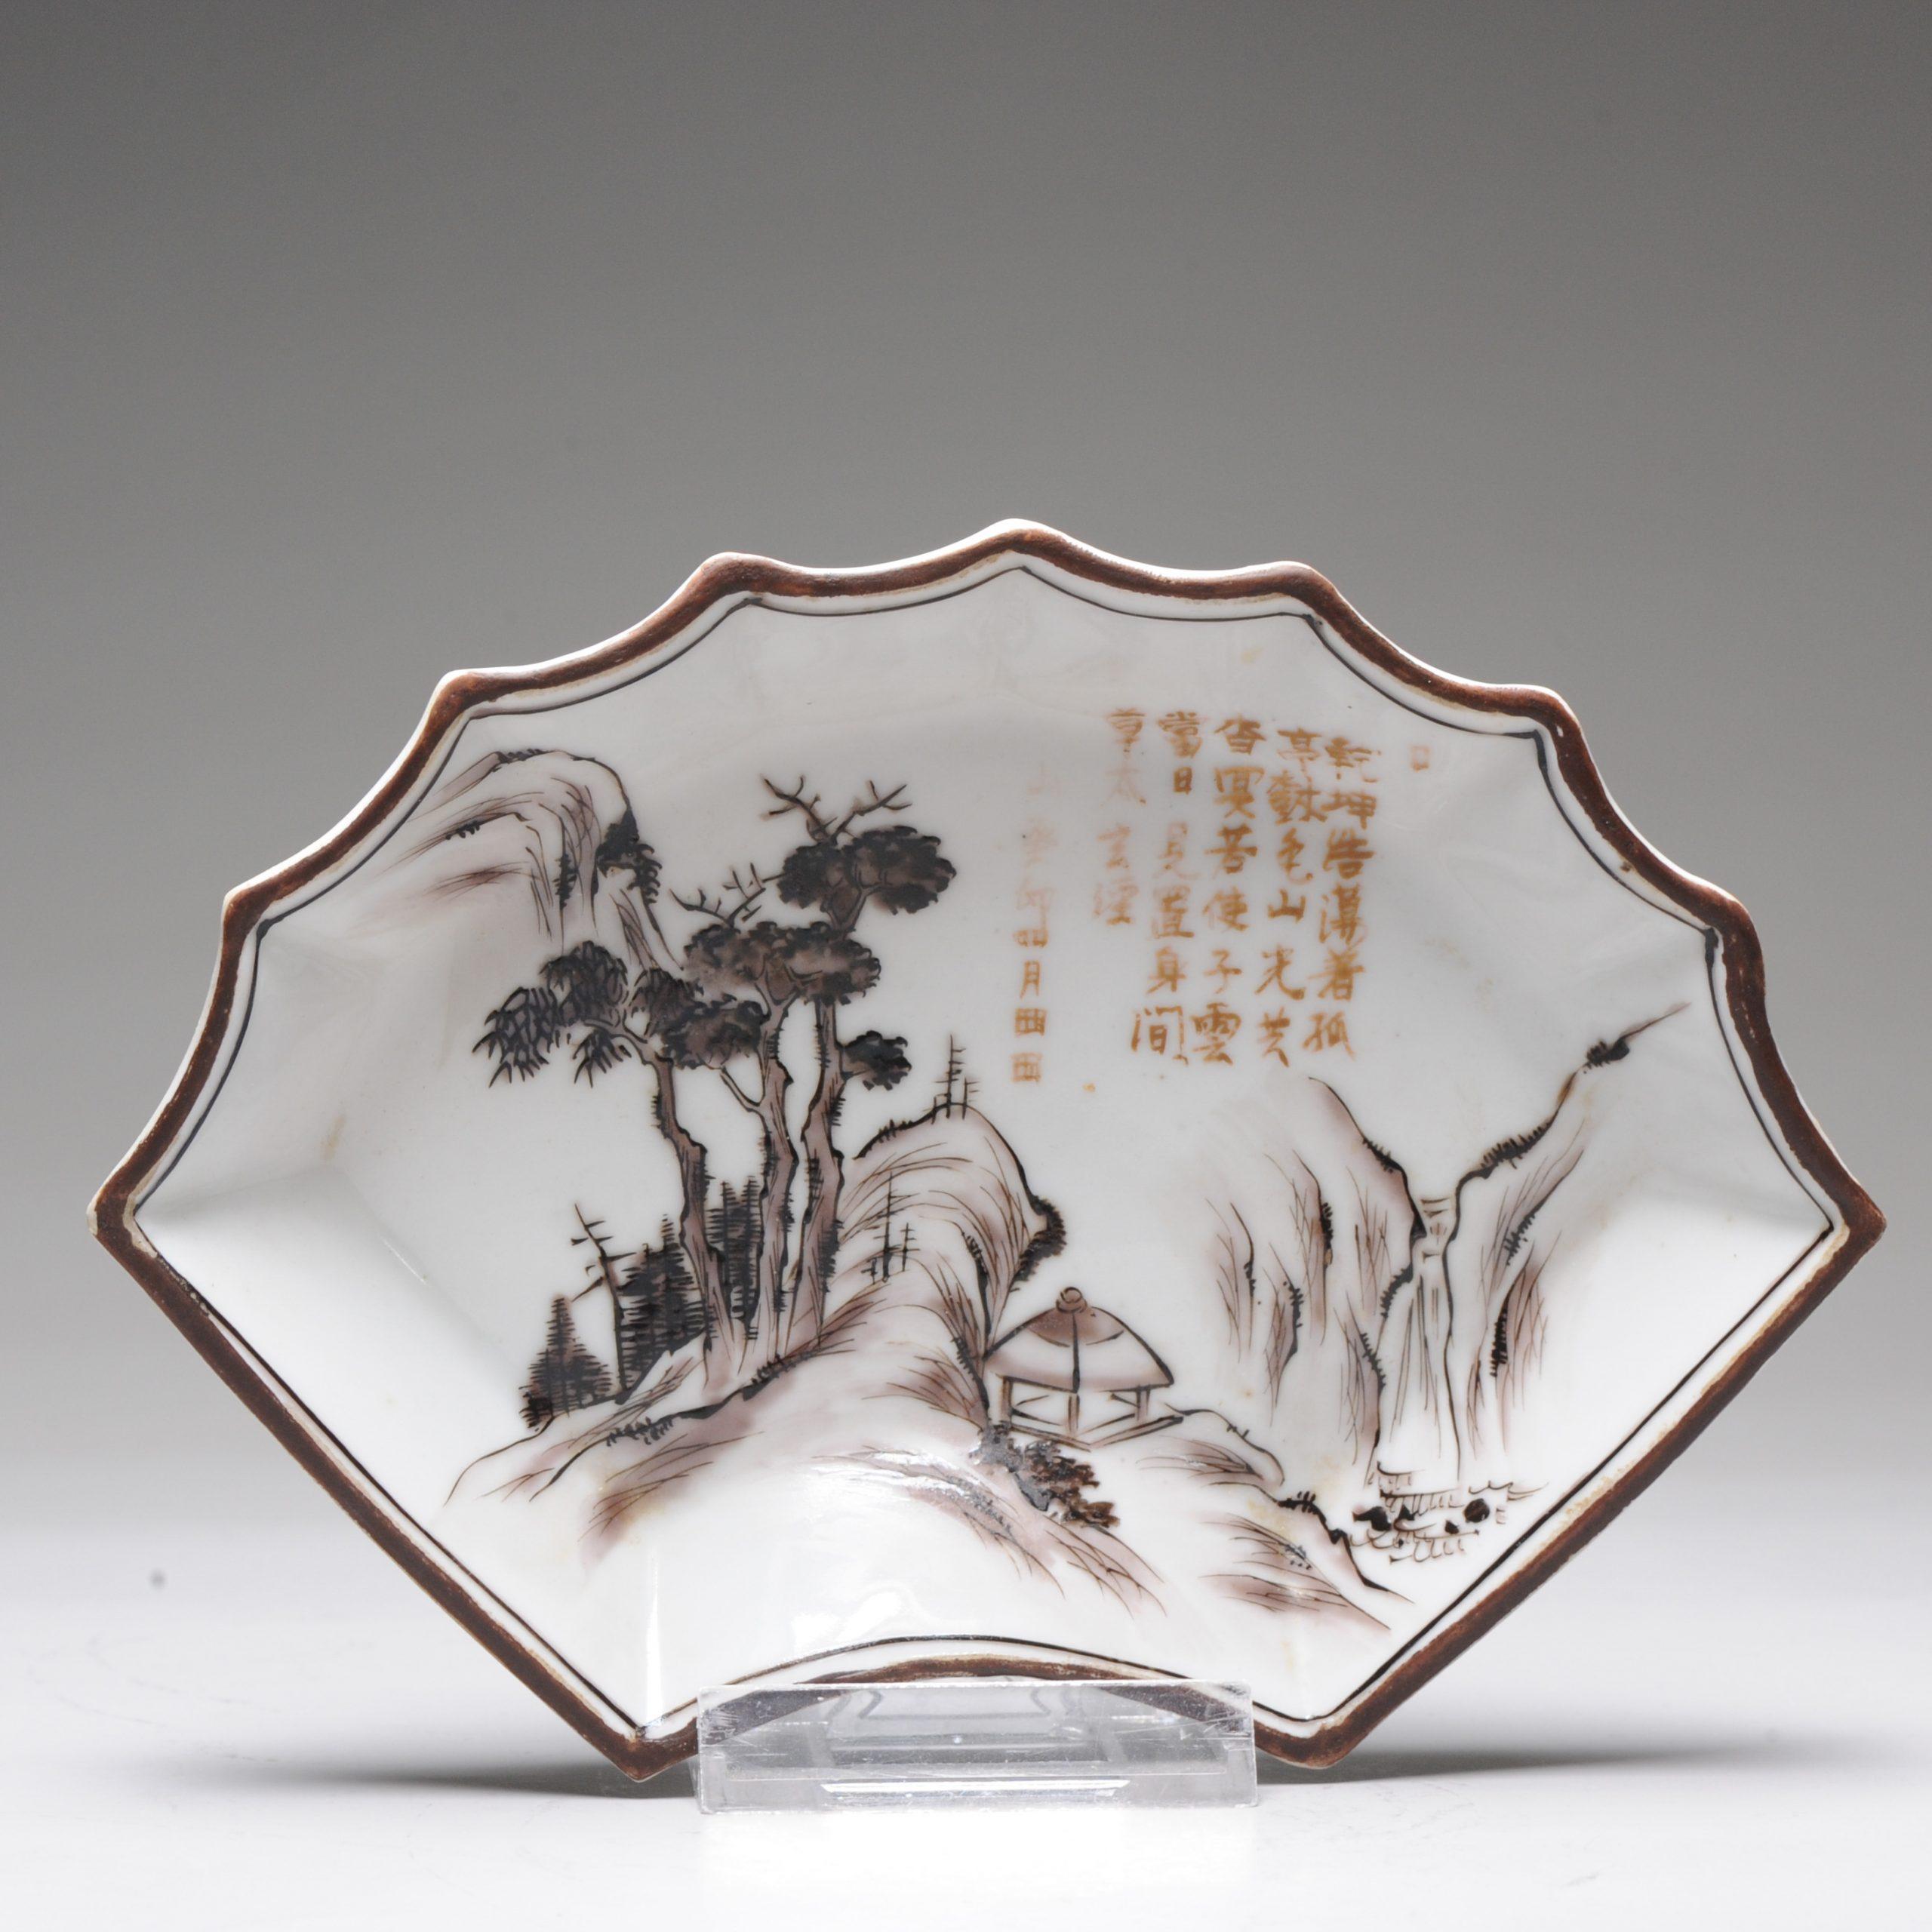 Description

Lovely and detailed piece with a great decoration of a poem and landscape

Condition
Overall Condition some enamel loss and 1 small chip to rim. Size 193x135x28mm DXDxH

Period
20th century.